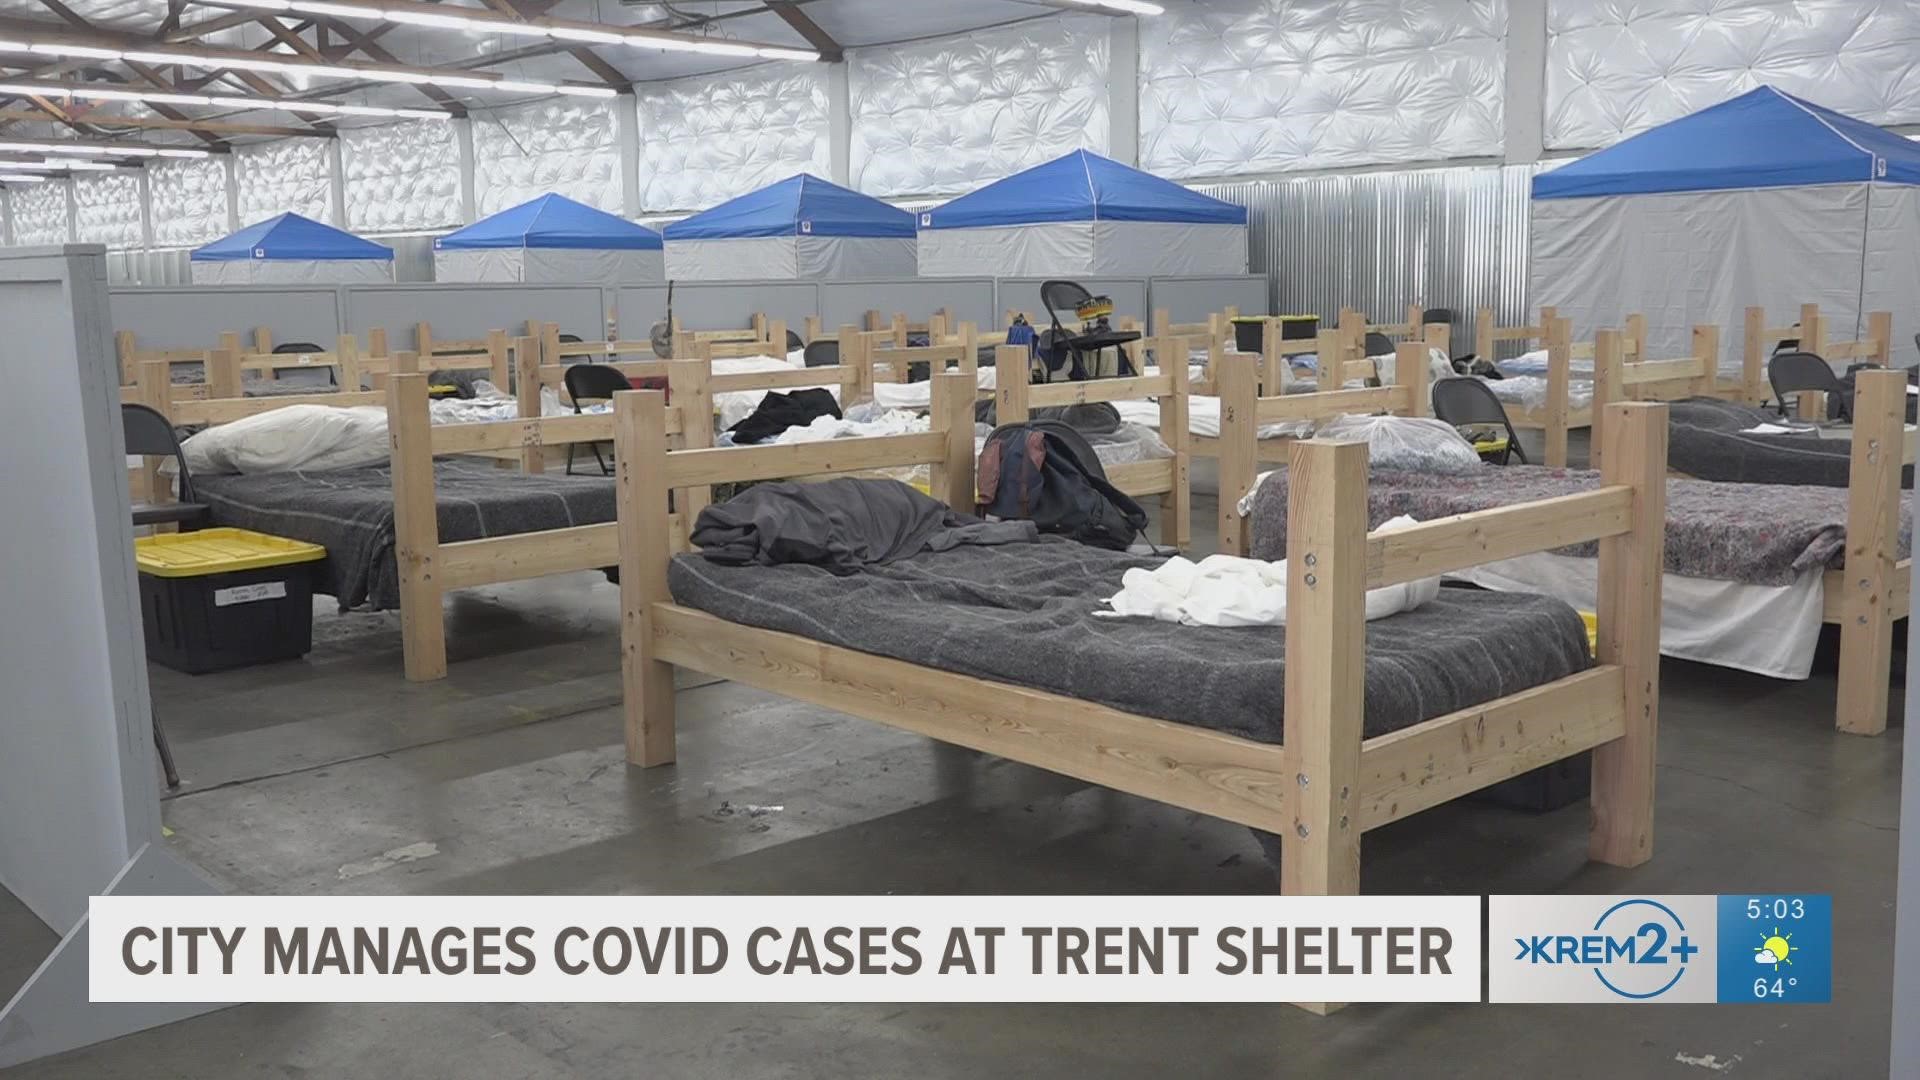 Spokane Regional Health District says COVID-19 testing at the shelter happens once a week, and over-the-counter tests are provided on days testing is not.